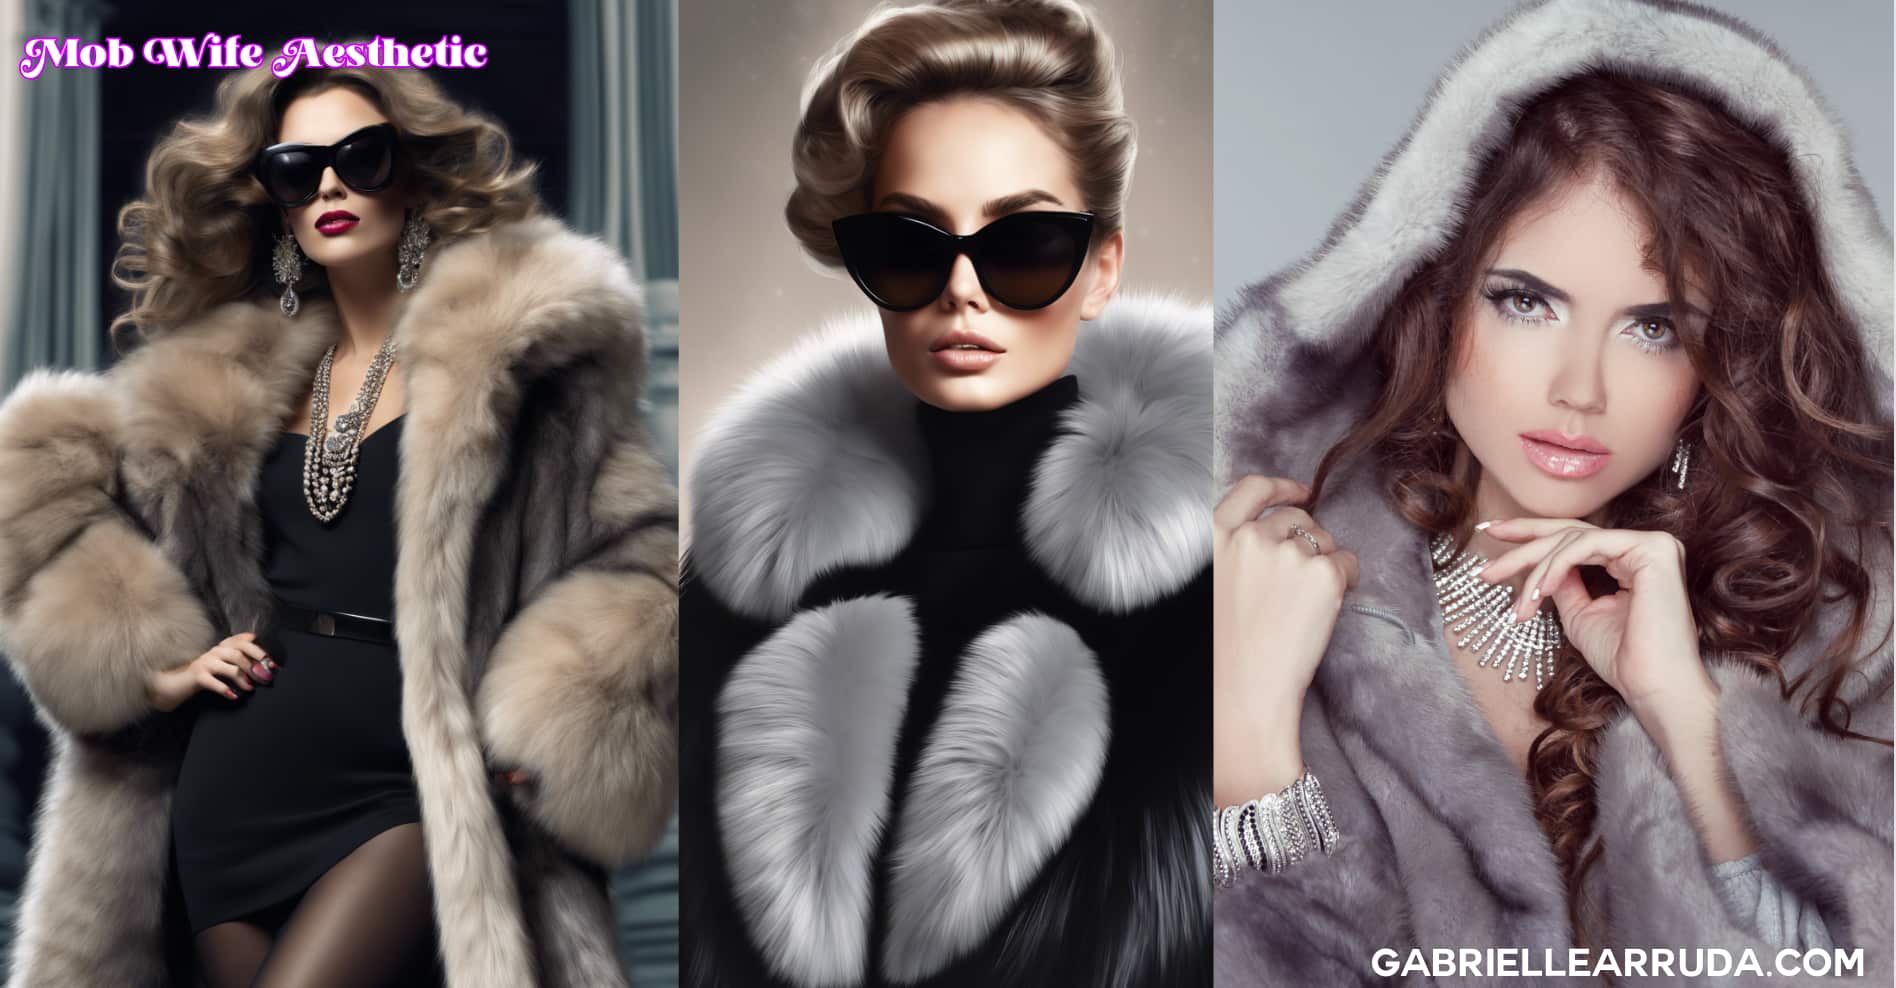 fur coat examples for mob wive aesthetic style